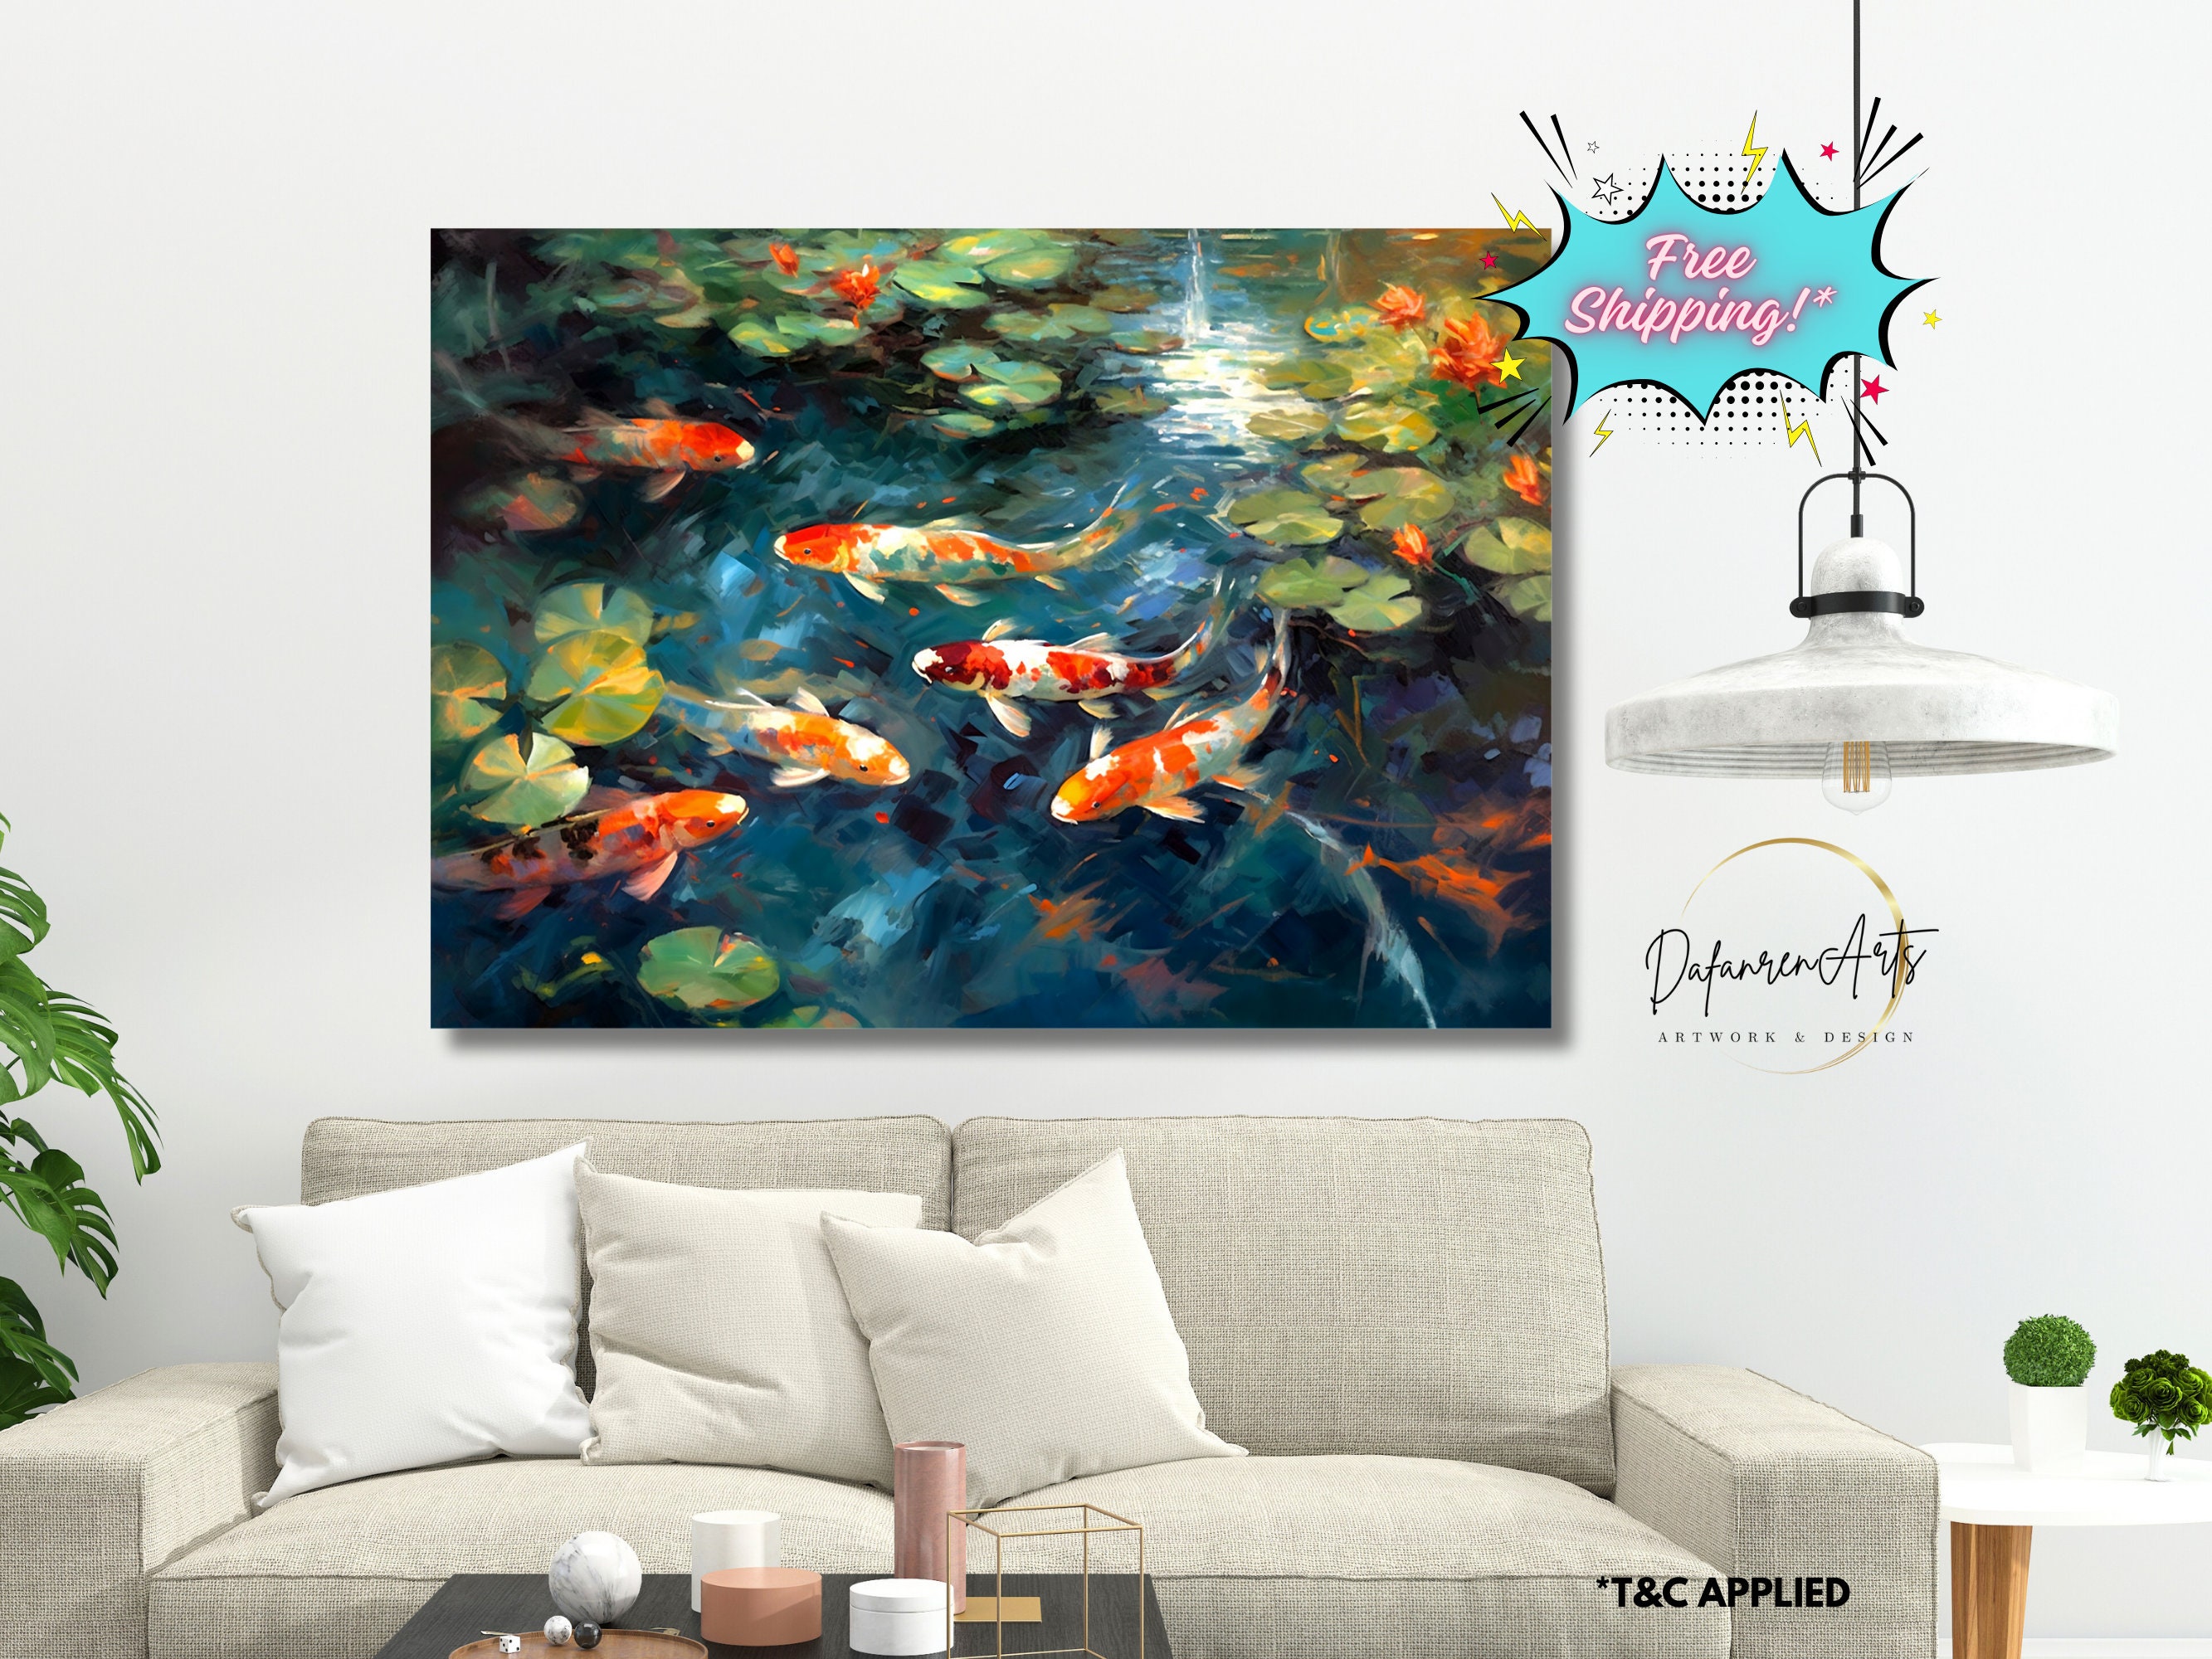 Koi Fish PAINT by NUMBER Kit Adults , White Lotus Plant in Lake